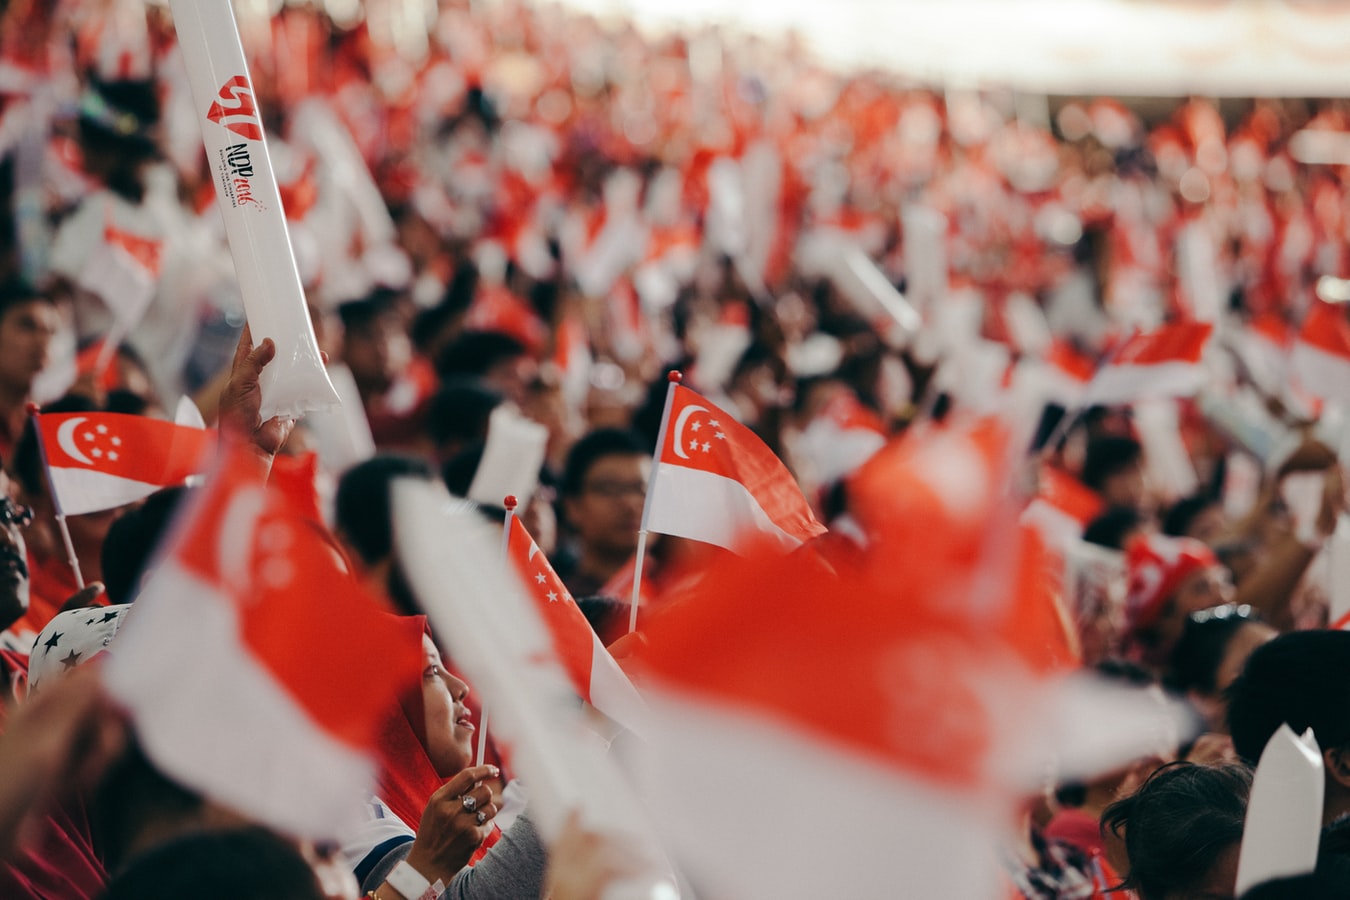 expat life in singapore - many waving singapore flags